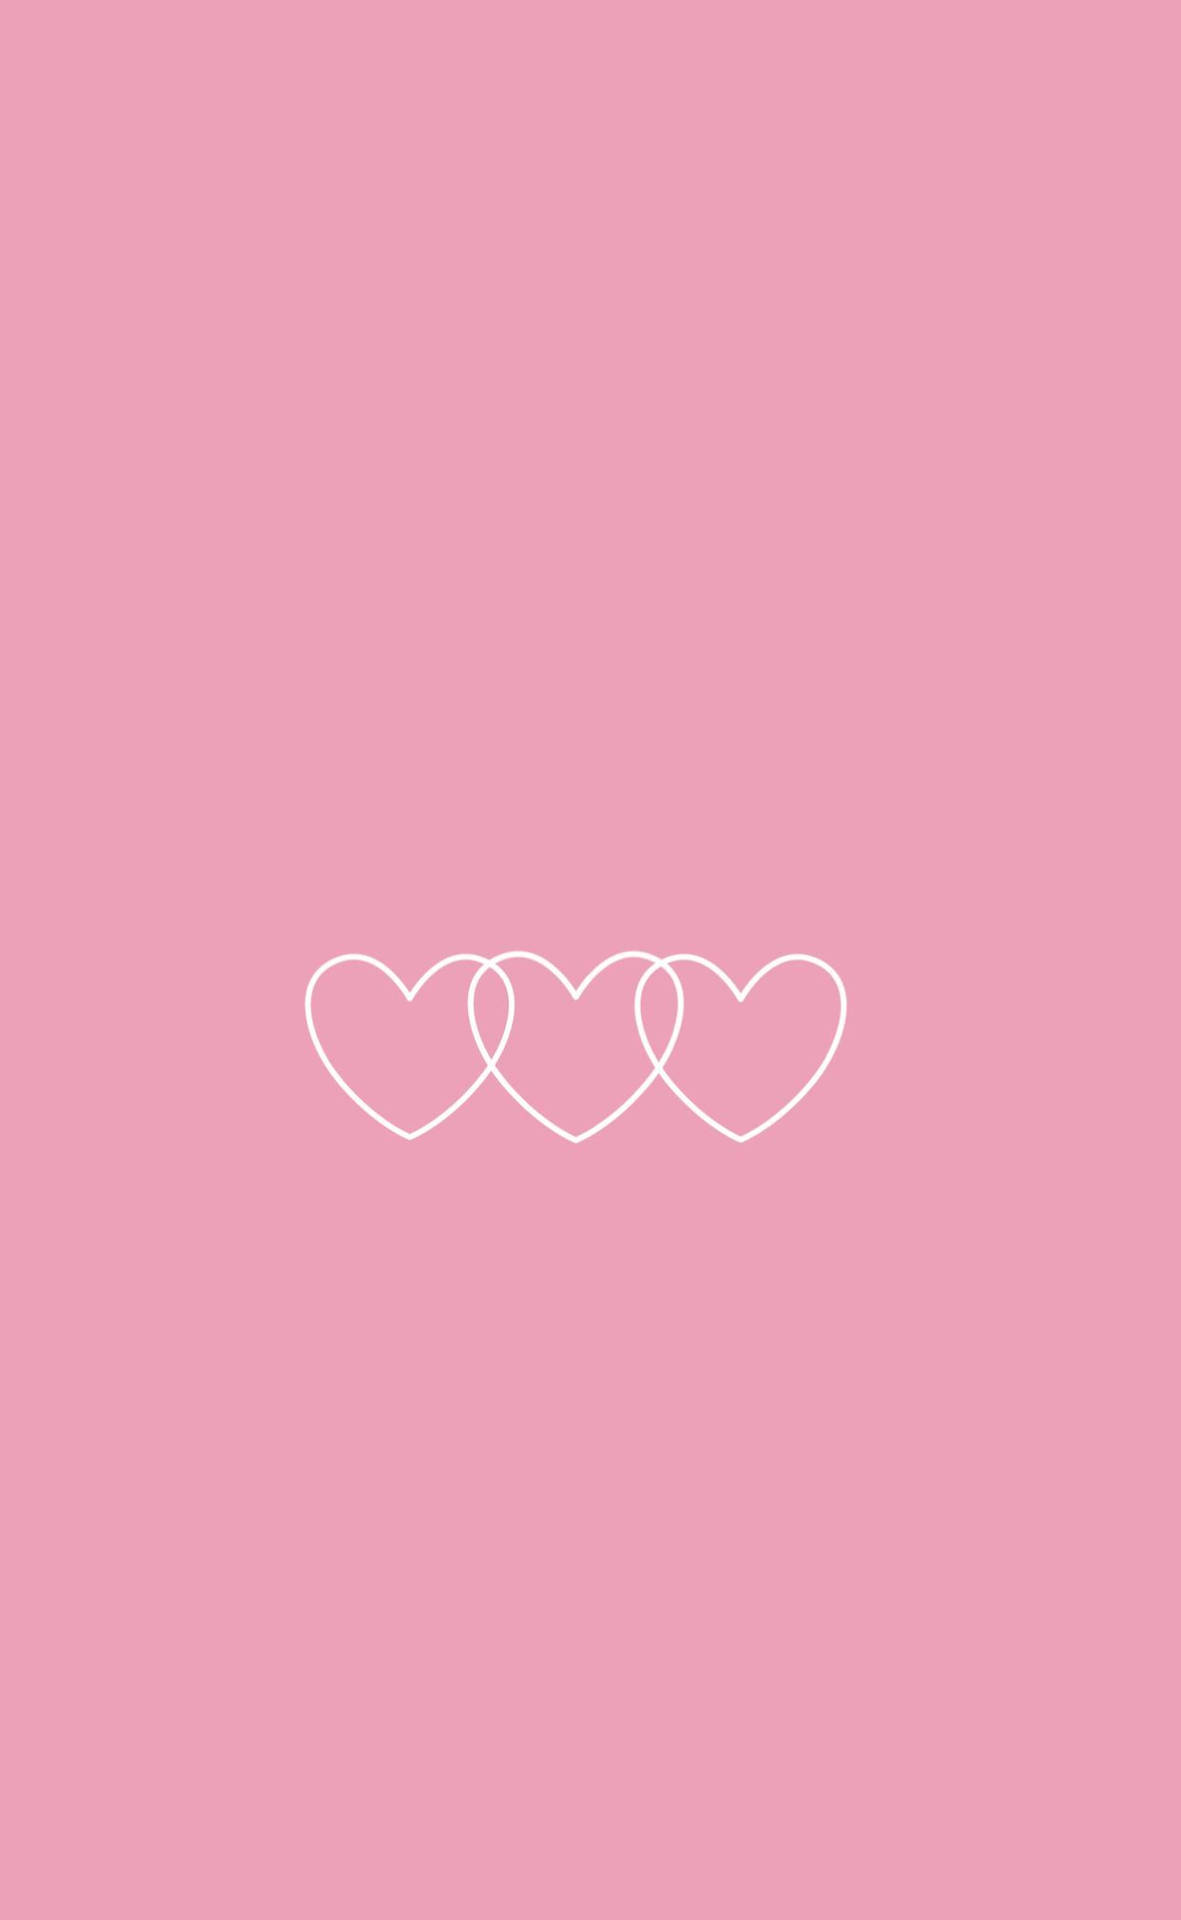 Cute And Pink Little Heart Patterns Background